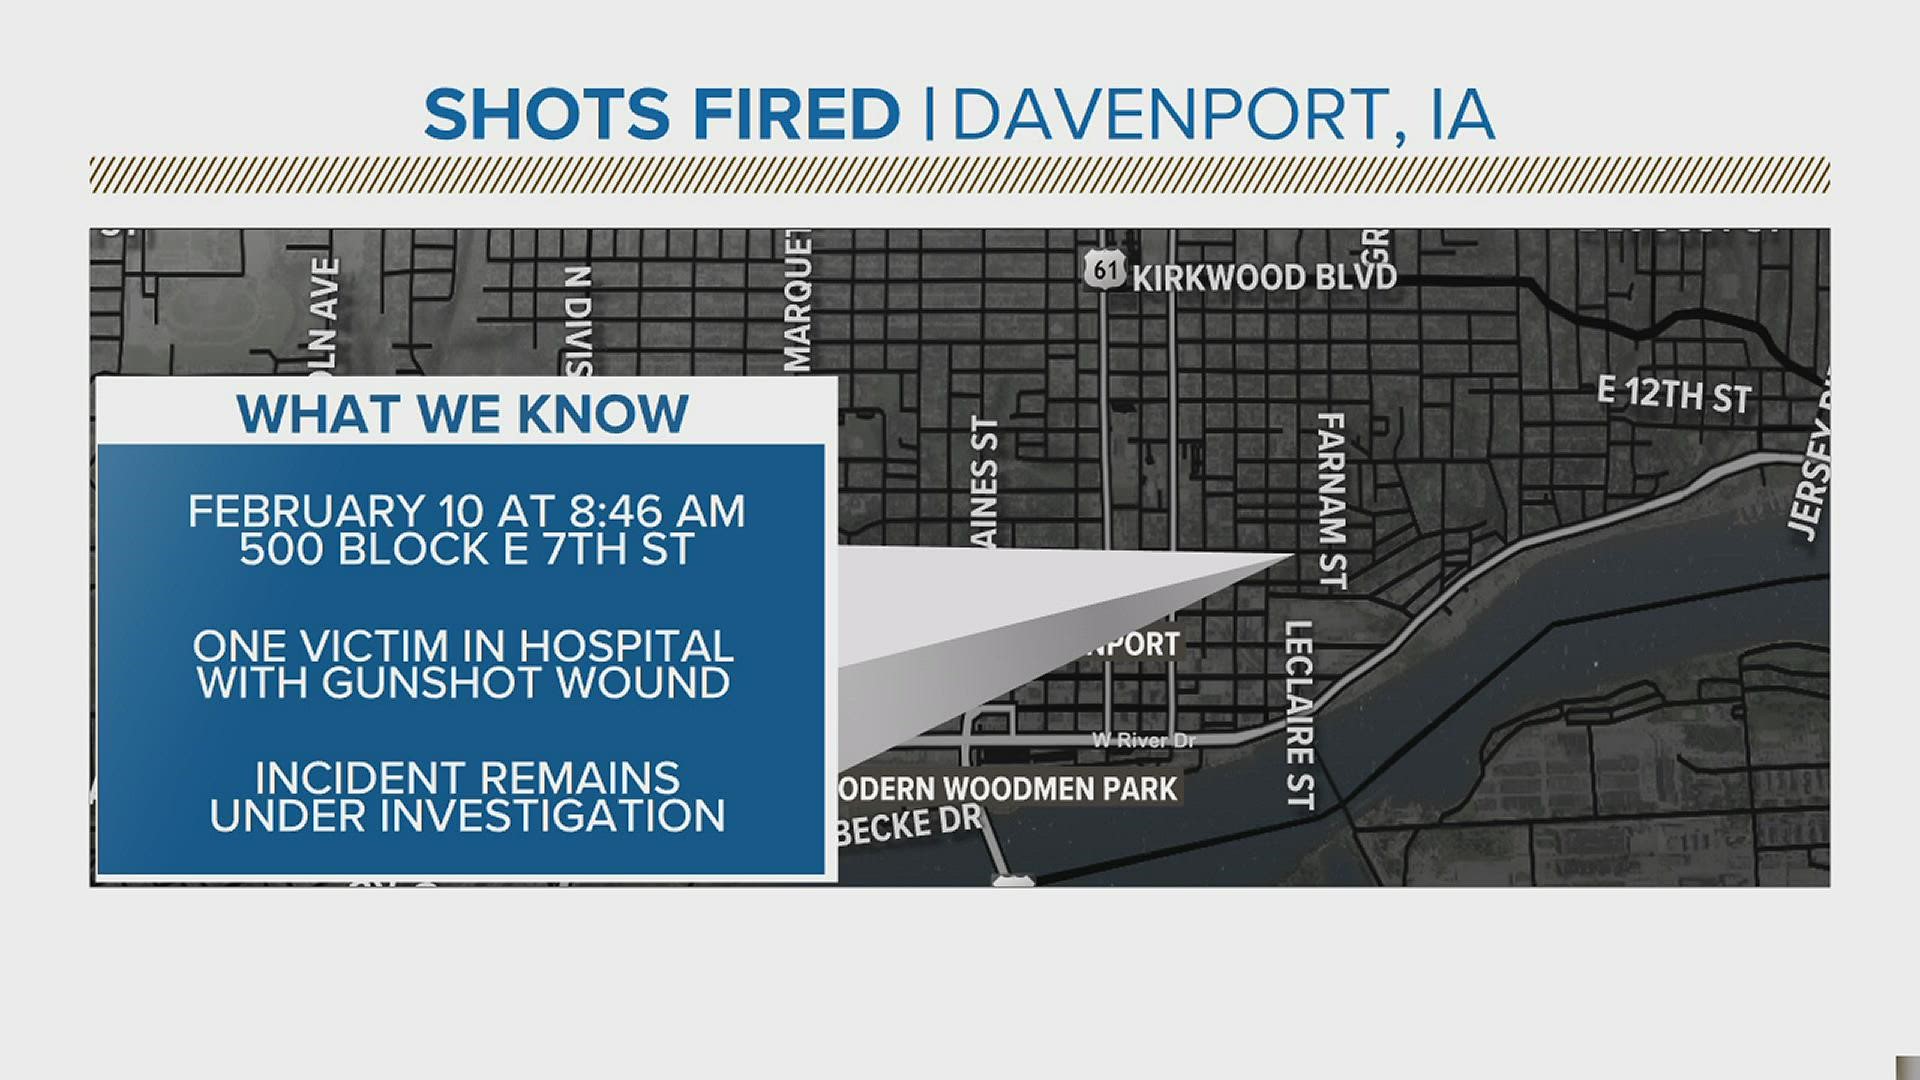 The shooting occurred at about 8:45 a.m. Thursday, Feb. 10 on East 7th Street in Davenport.